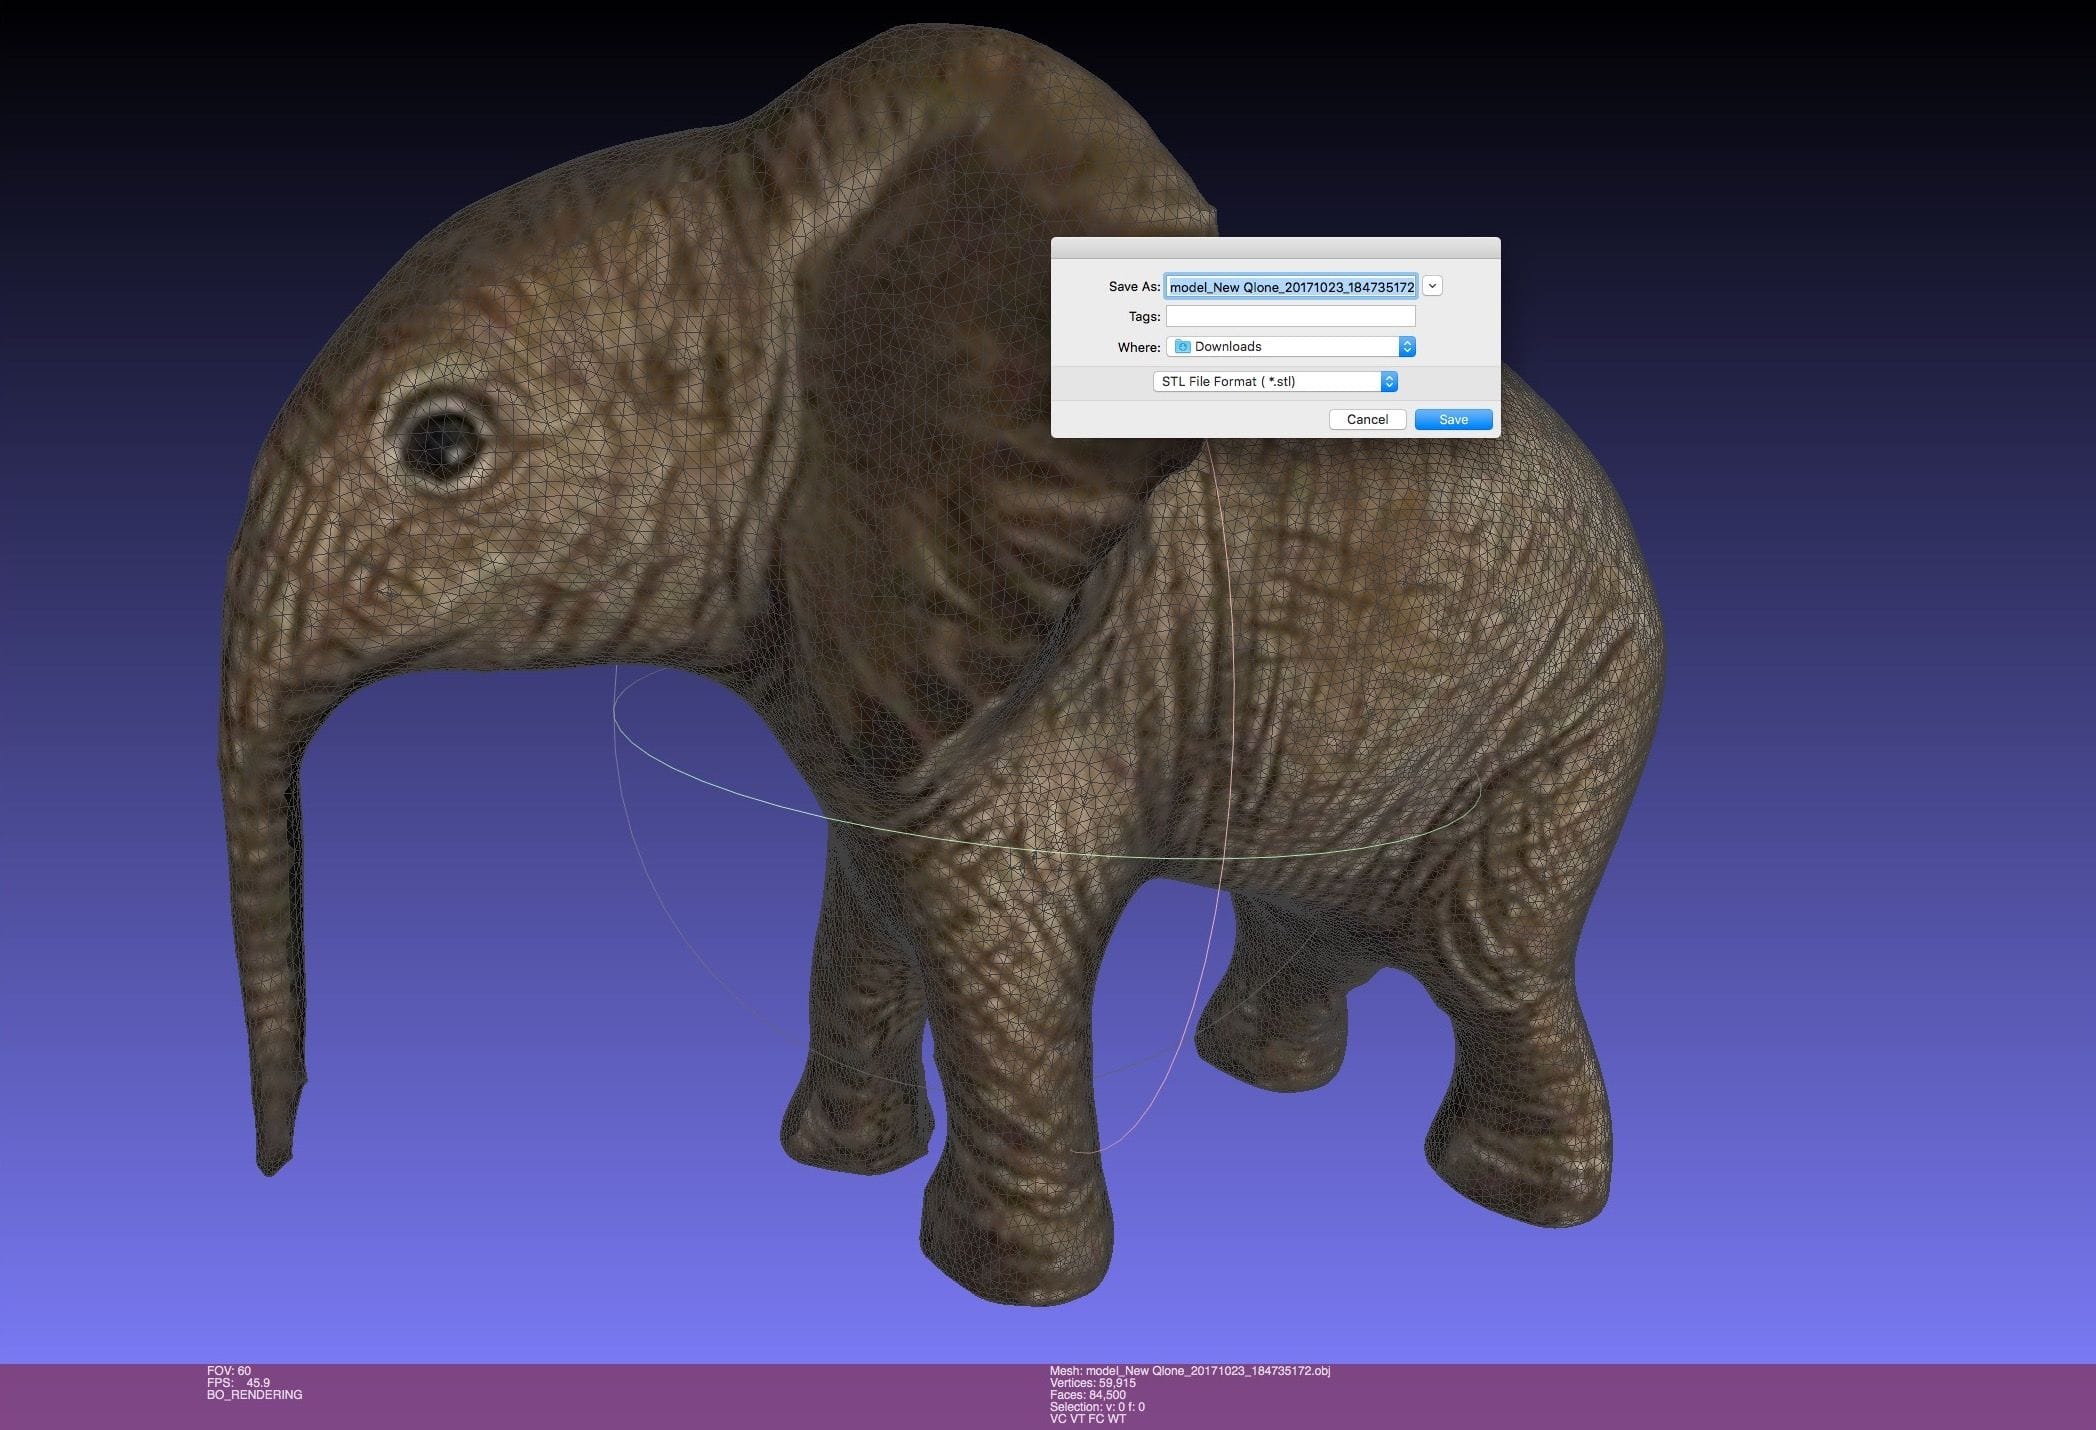  The same 3D elephant model found in Google Poly, now being converted into STL format for printing 